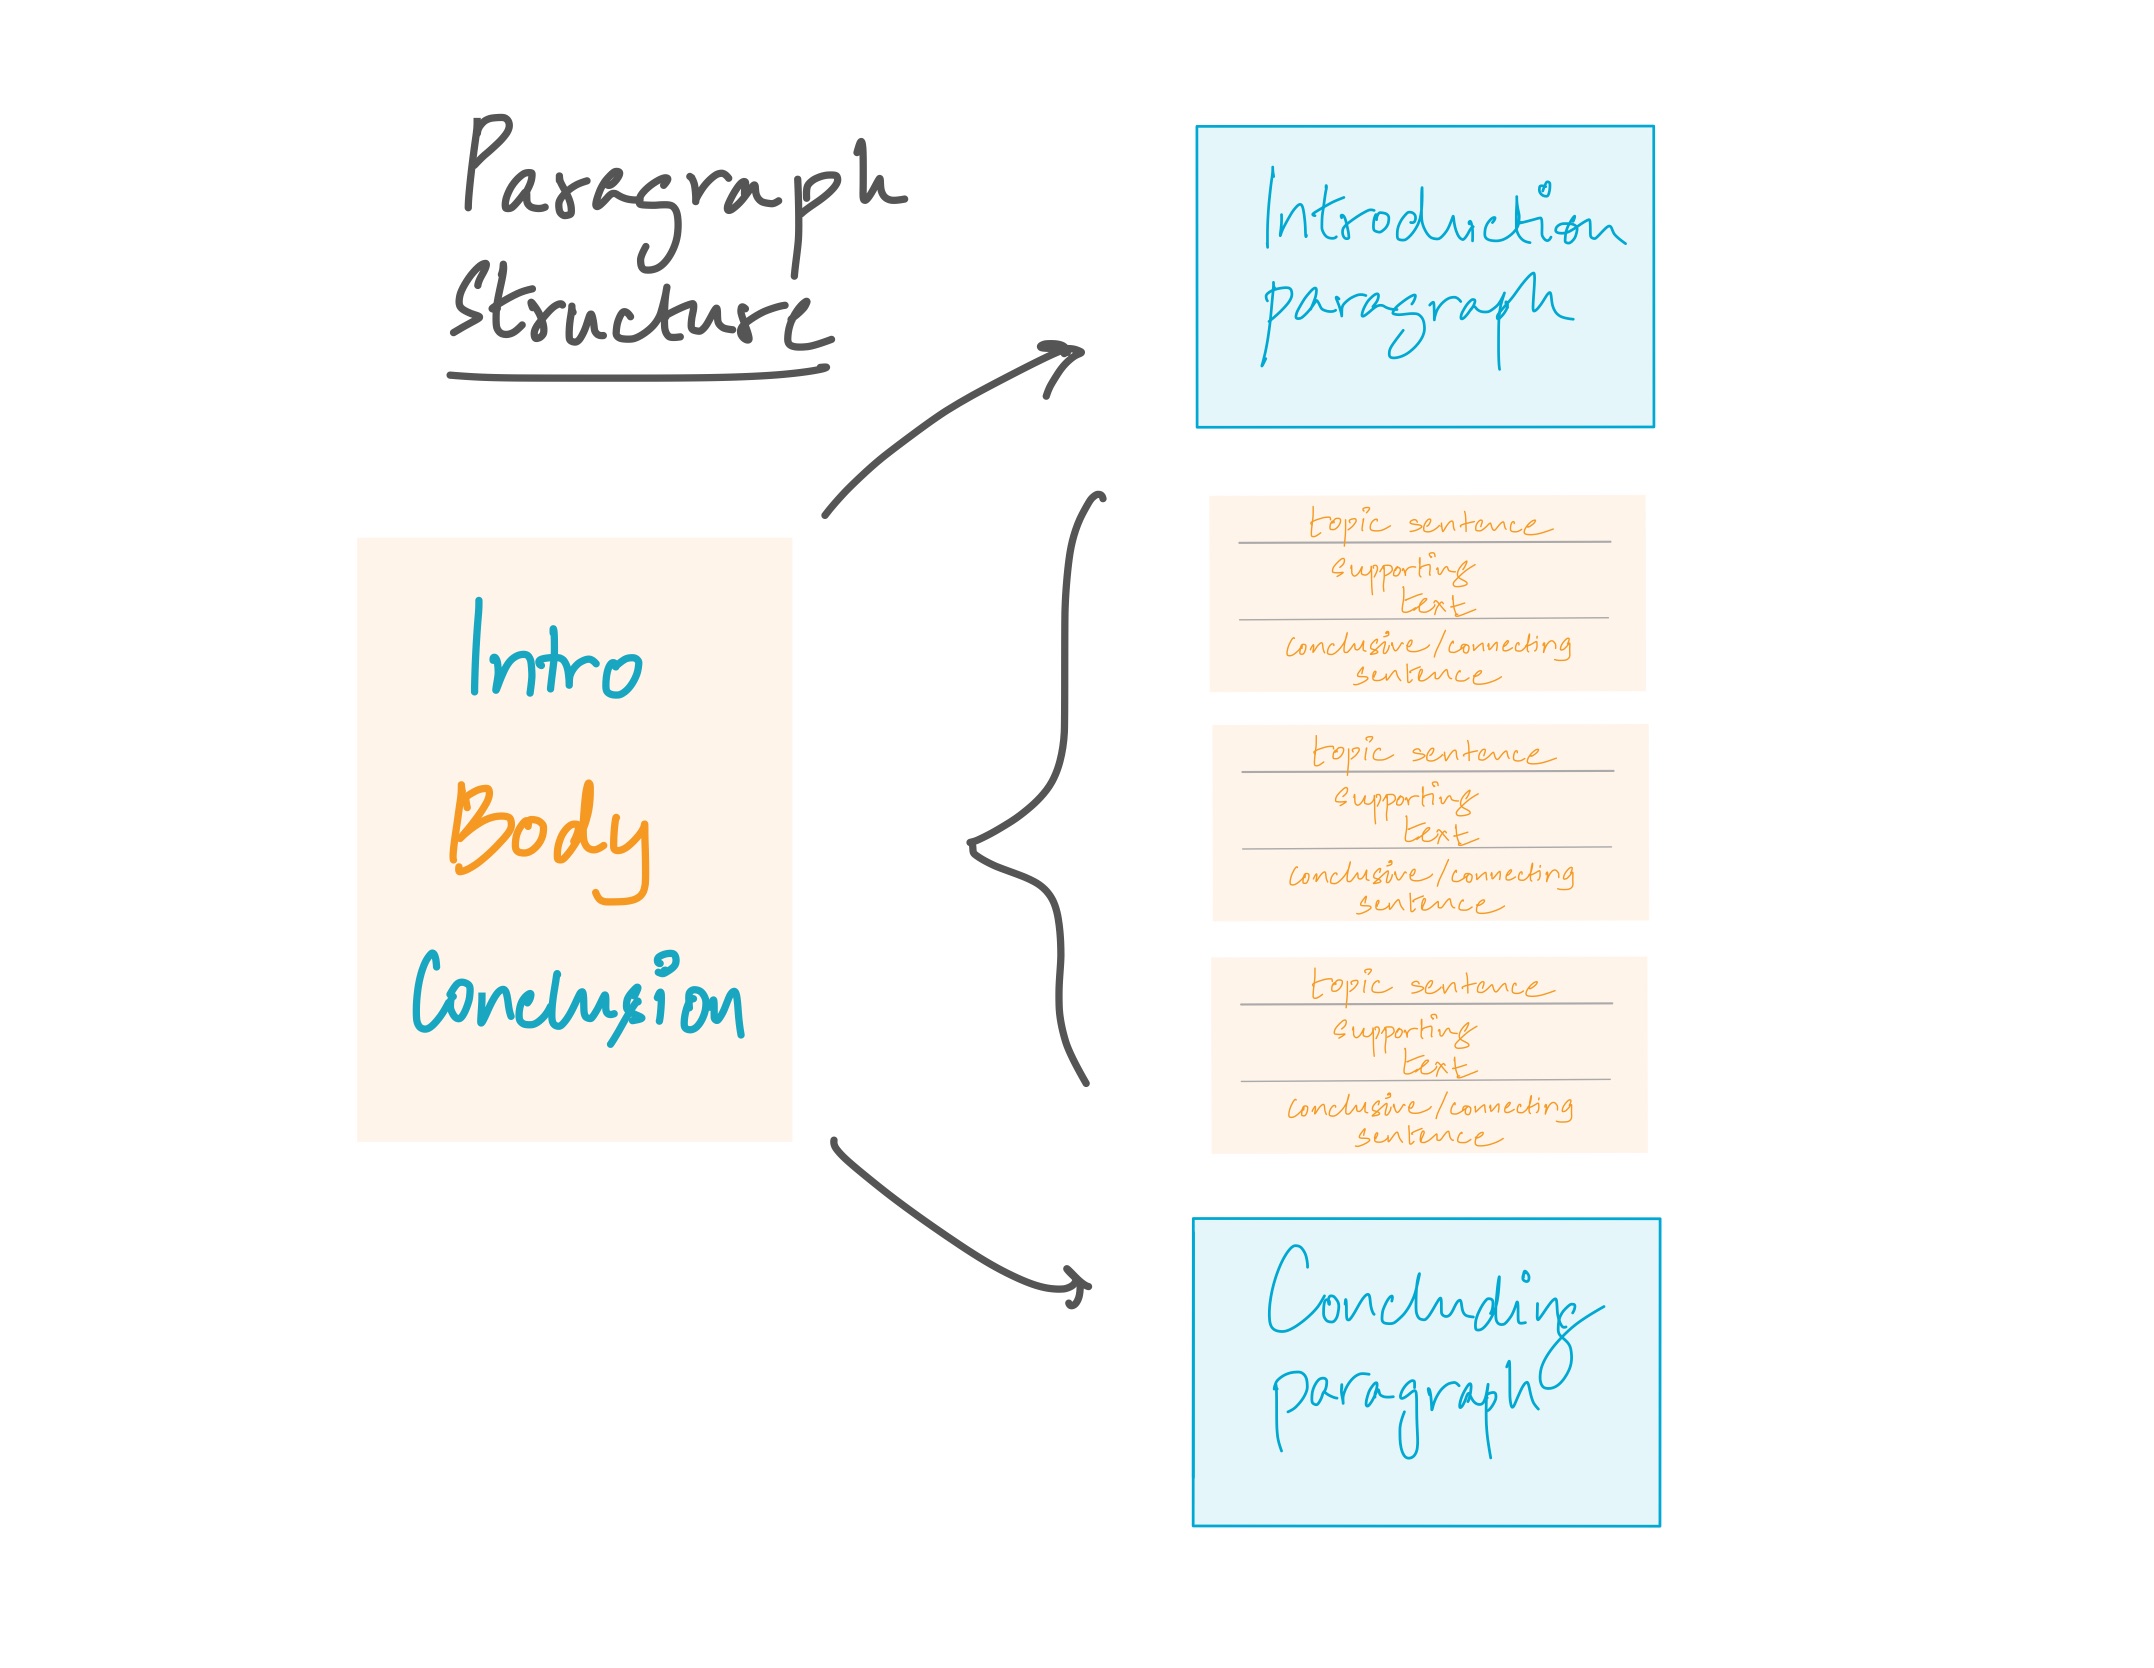 Figure 2. Paragraph Structure. Every paragraph should begin with a topical sentence that describes the contents of the paragraph briefly. The body of the paragraph elaborates on the topic giving more detailed insights. Finally, the concluding remark can also act as a connecting sentence to give way to the content of the next paragraph. This can also be omitted at times.